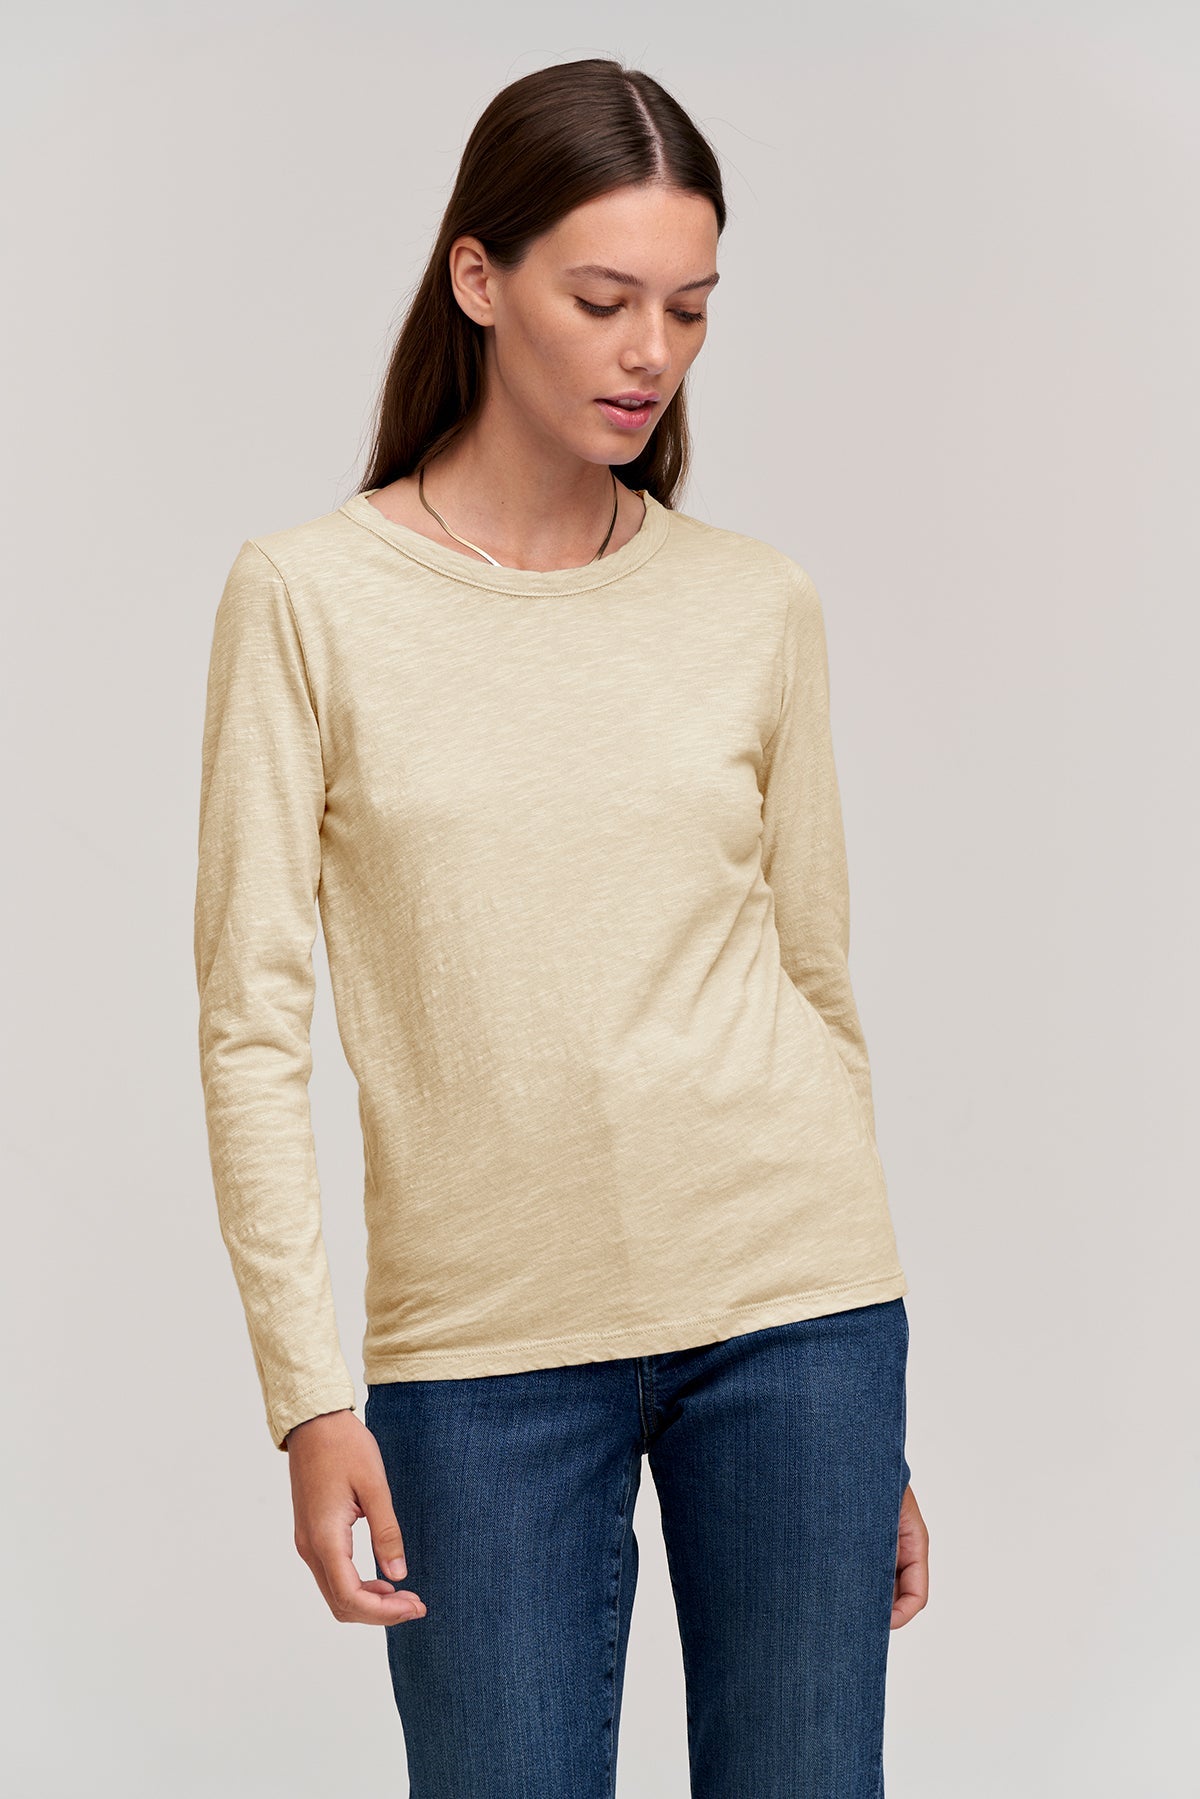 Lizzie long sleeve tee in sesame with blue denim front-26630740443329